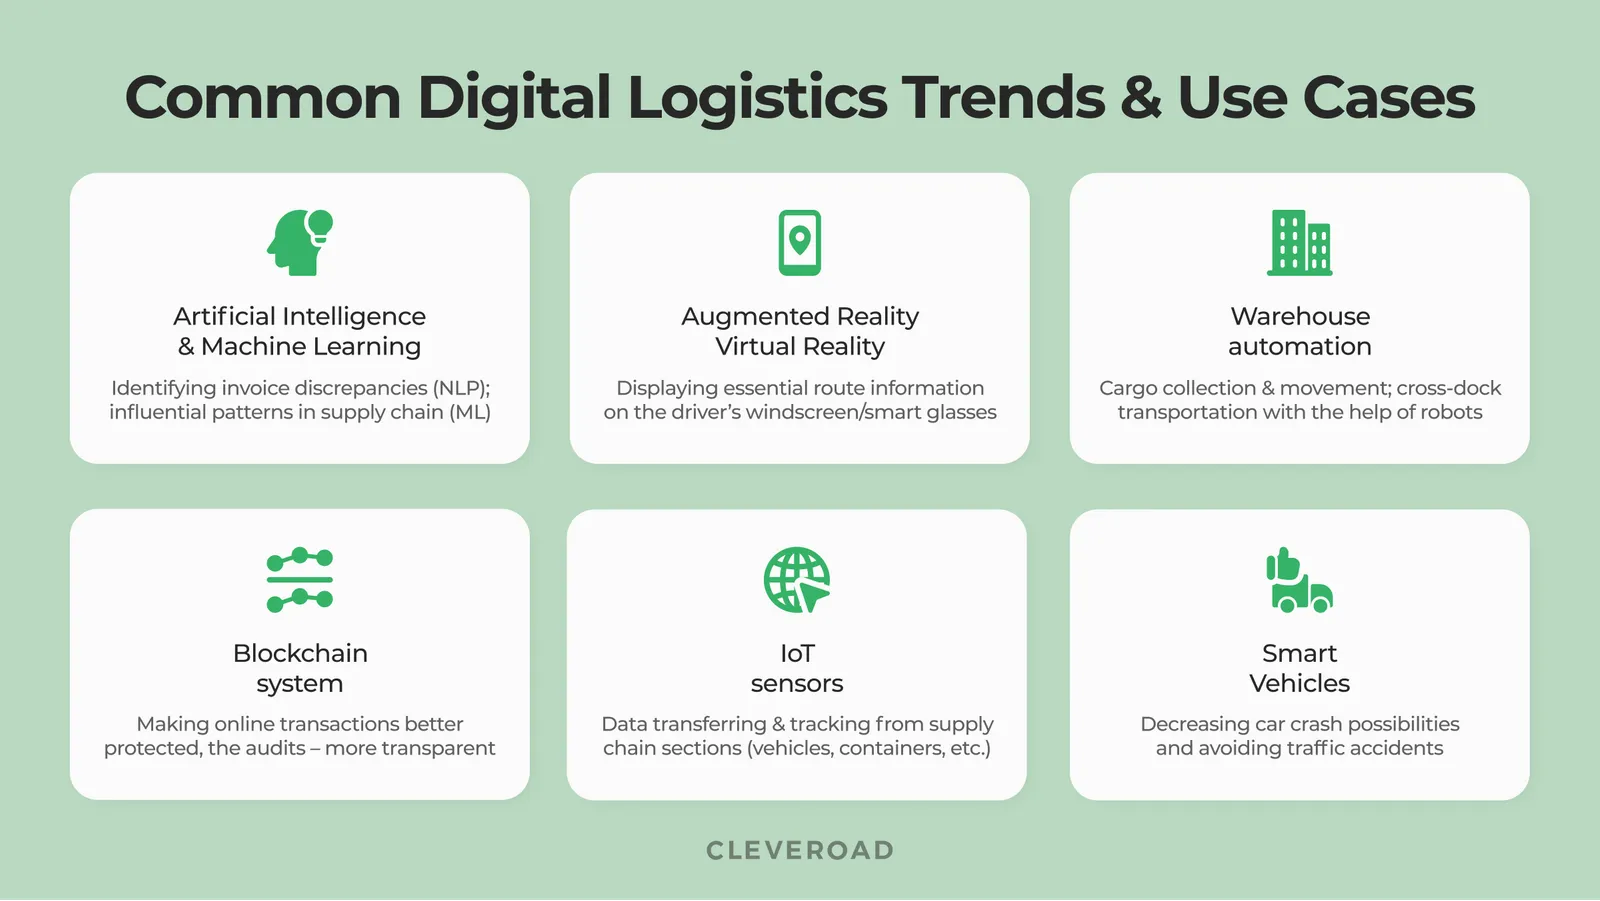 The most common trends in logistics digitalization and their use cases